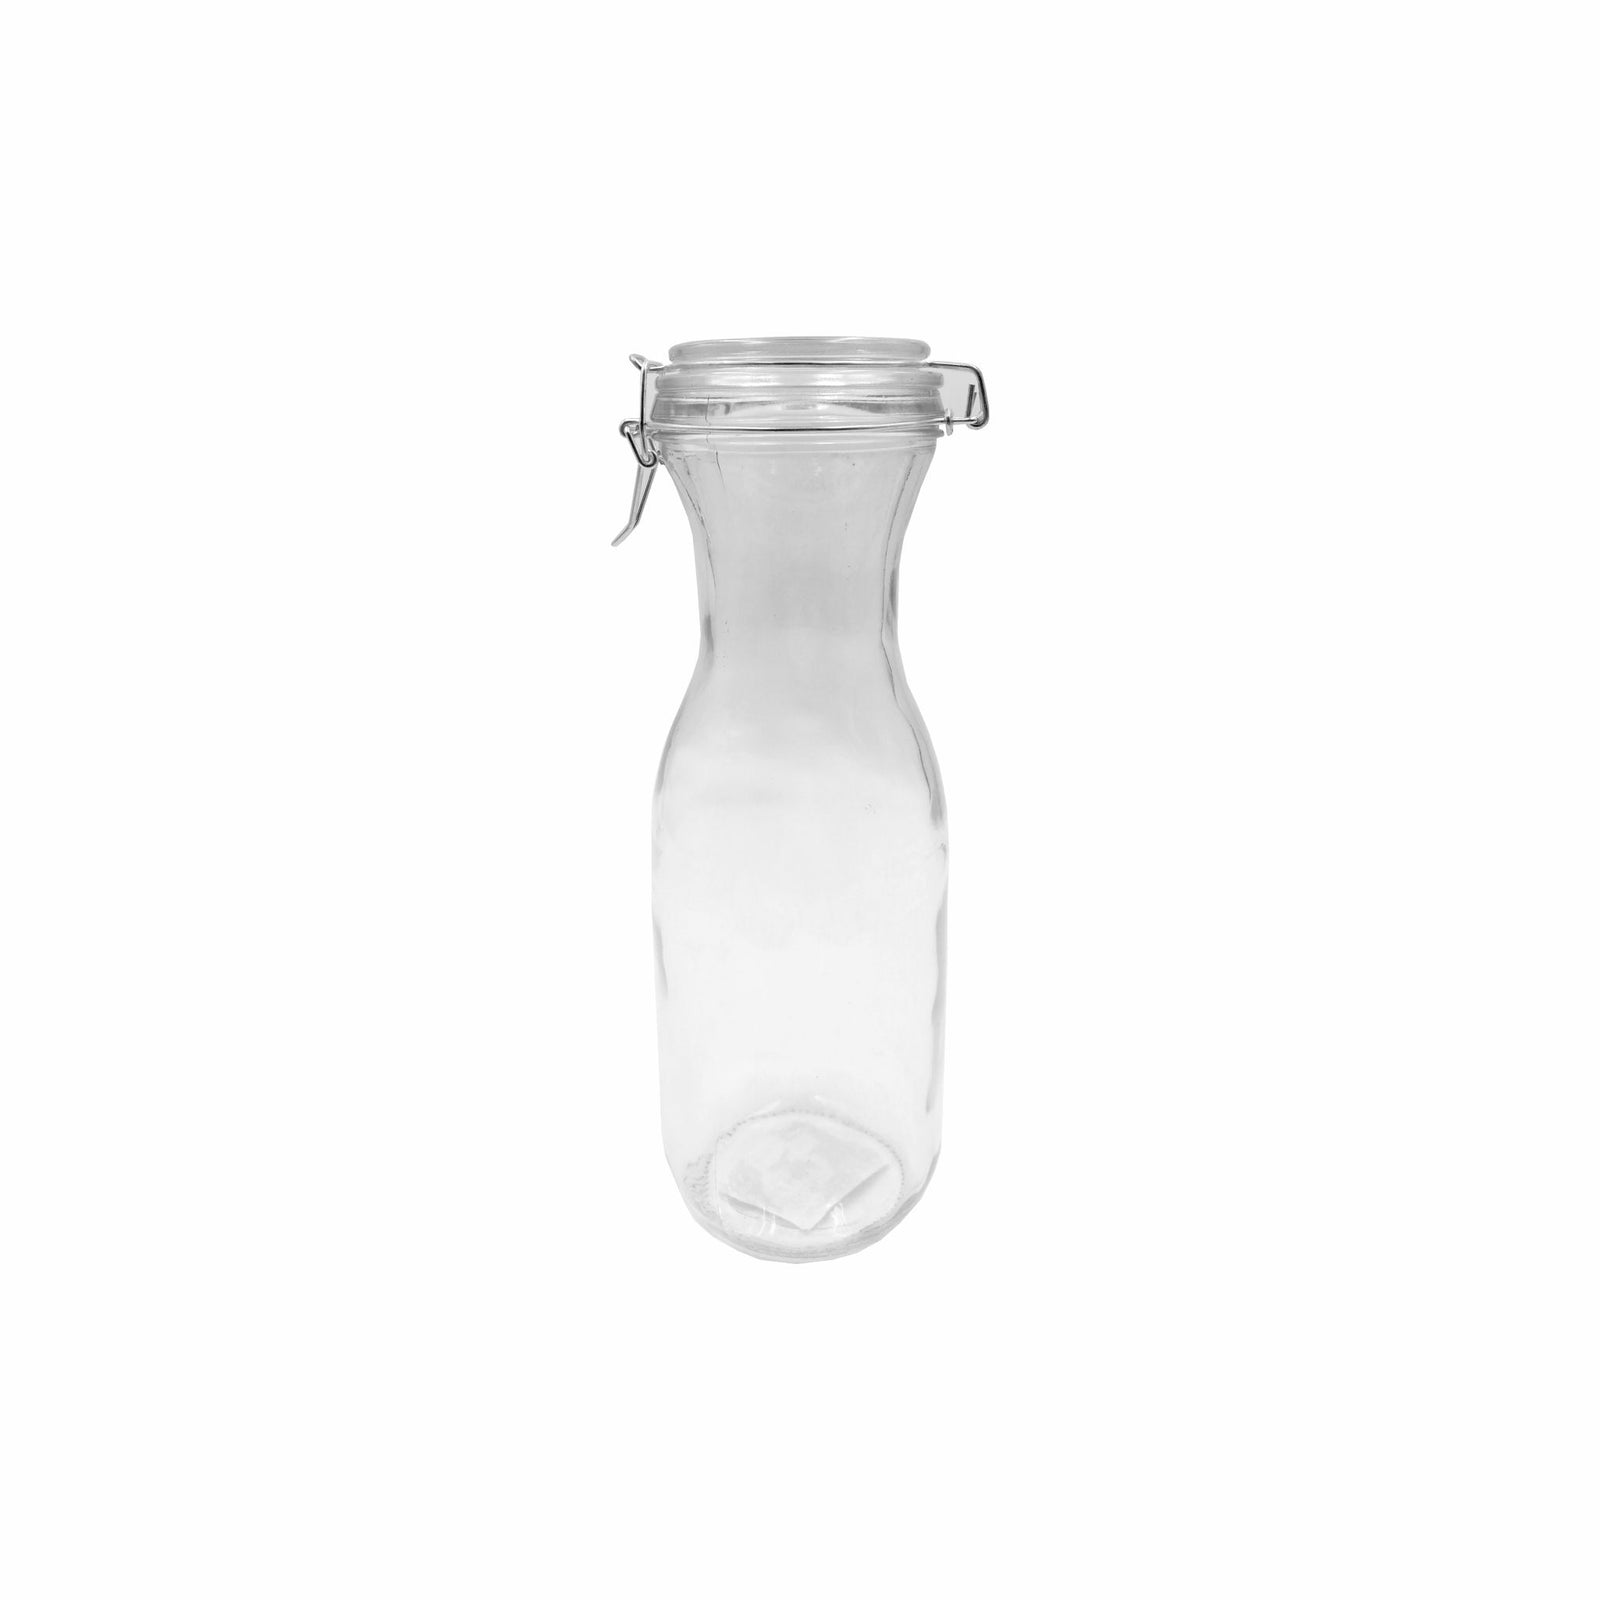 REGENT GLASS CARAFE WITH RESEALABLE CLIP TOP GLASS LID 6 PACK, 500ML (200X75MM DIA) Regent